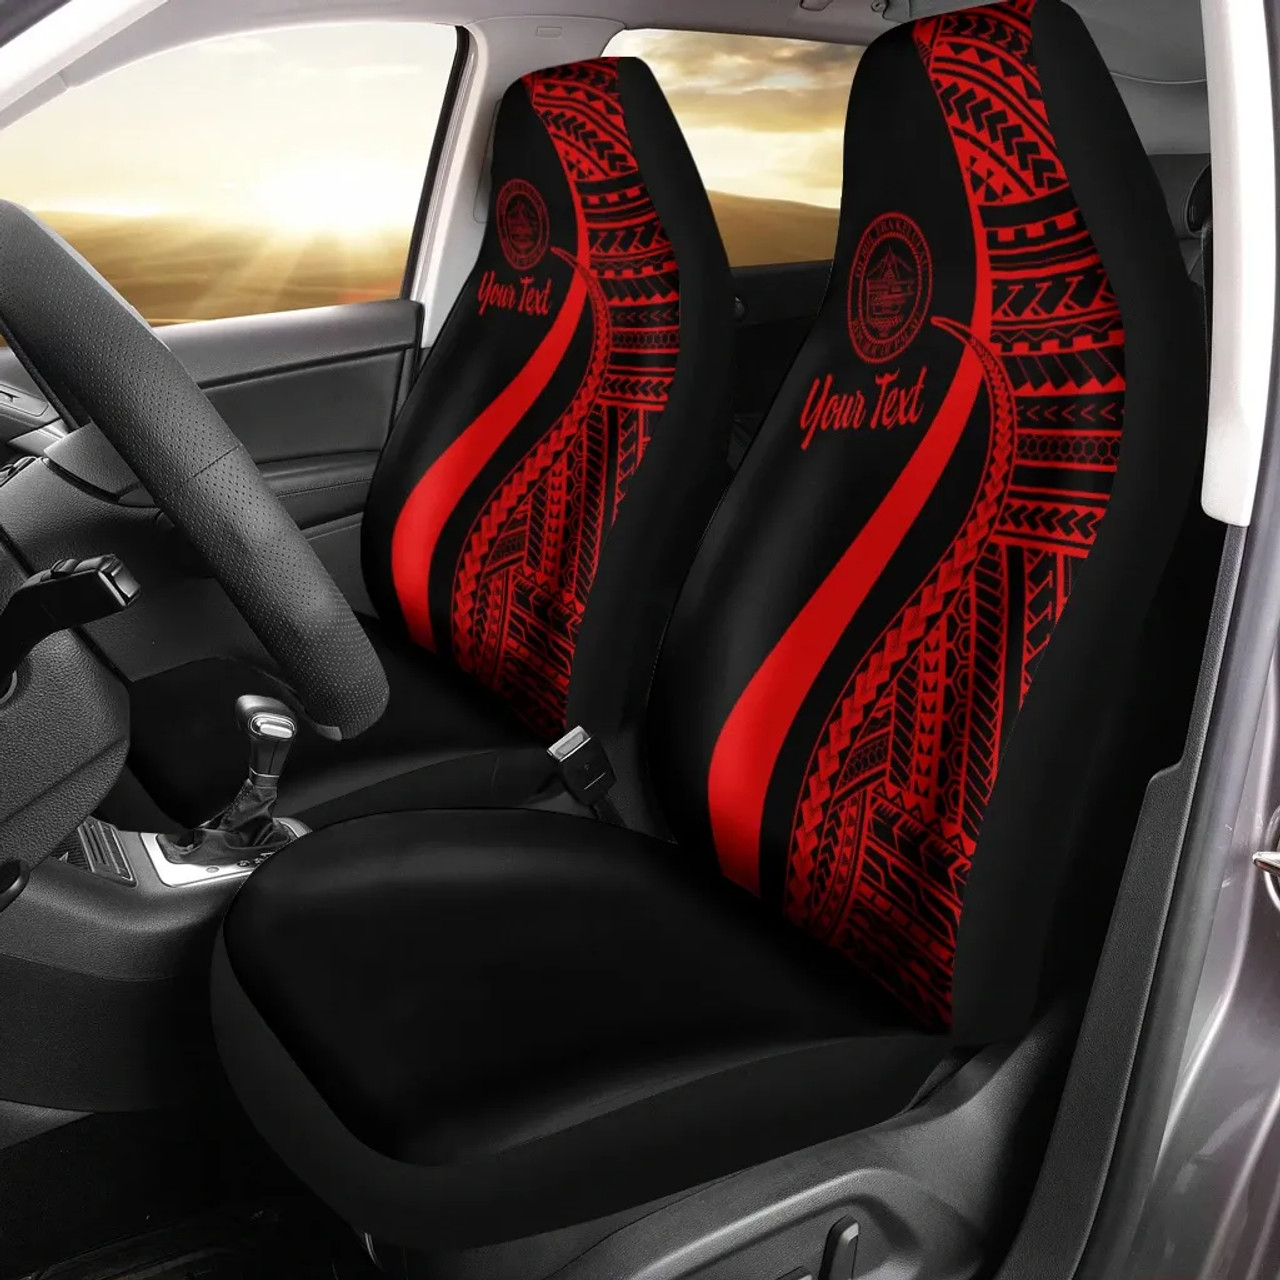 Palau Custom Personalised Car Seat Covers - Red Polynesian Tentacle Tribal Pattern Crest